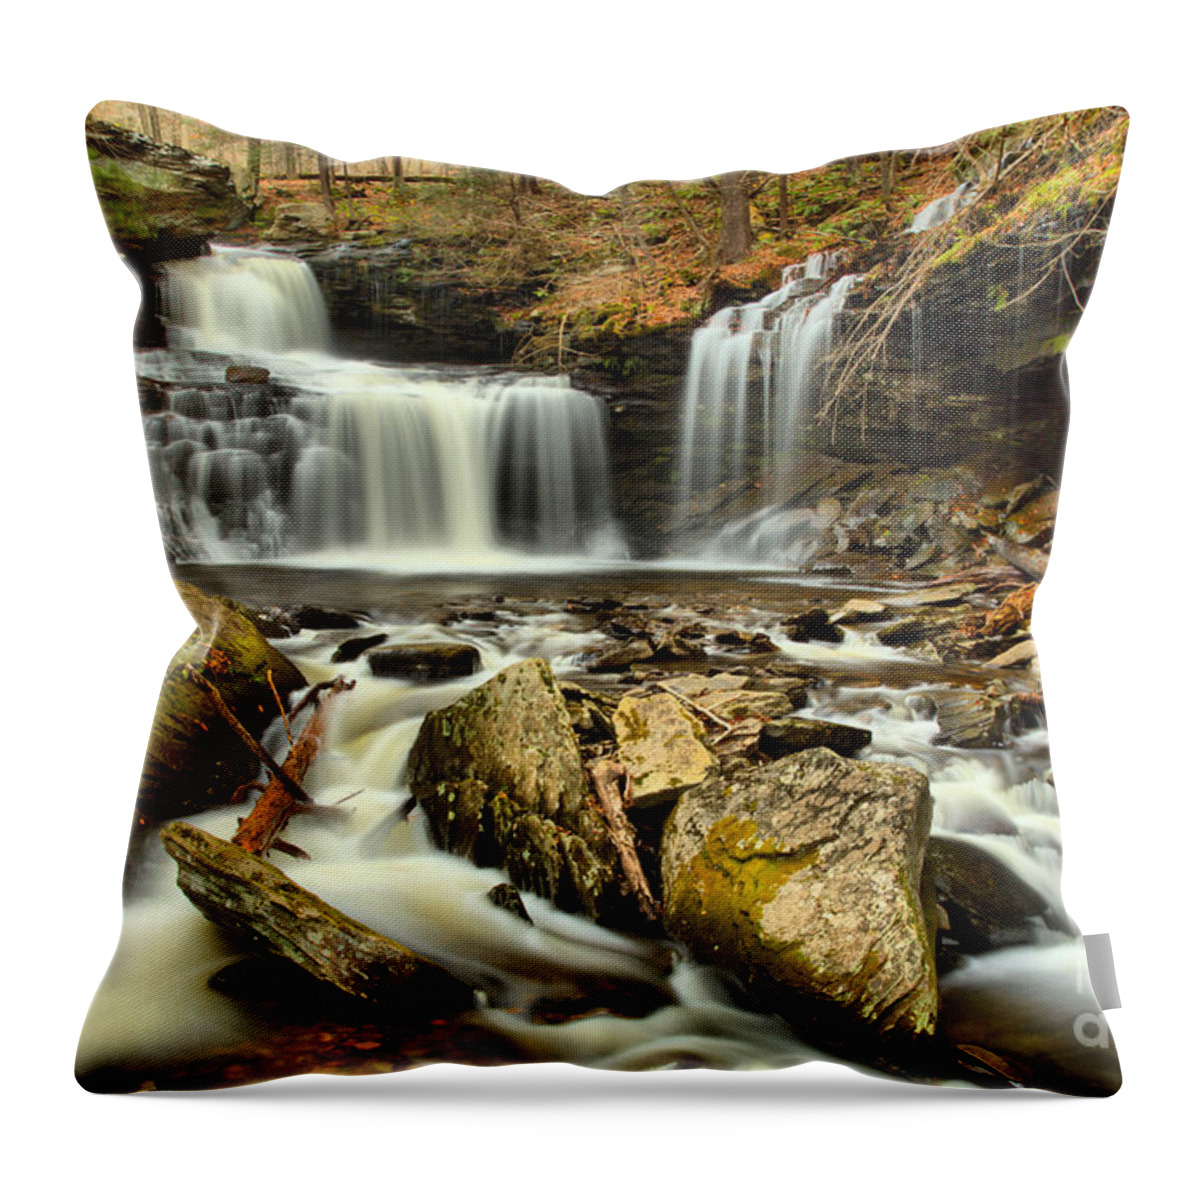 R Throw Pillow featuring the photograph Ricketts Glen Streams And Falls by Adam Jewell